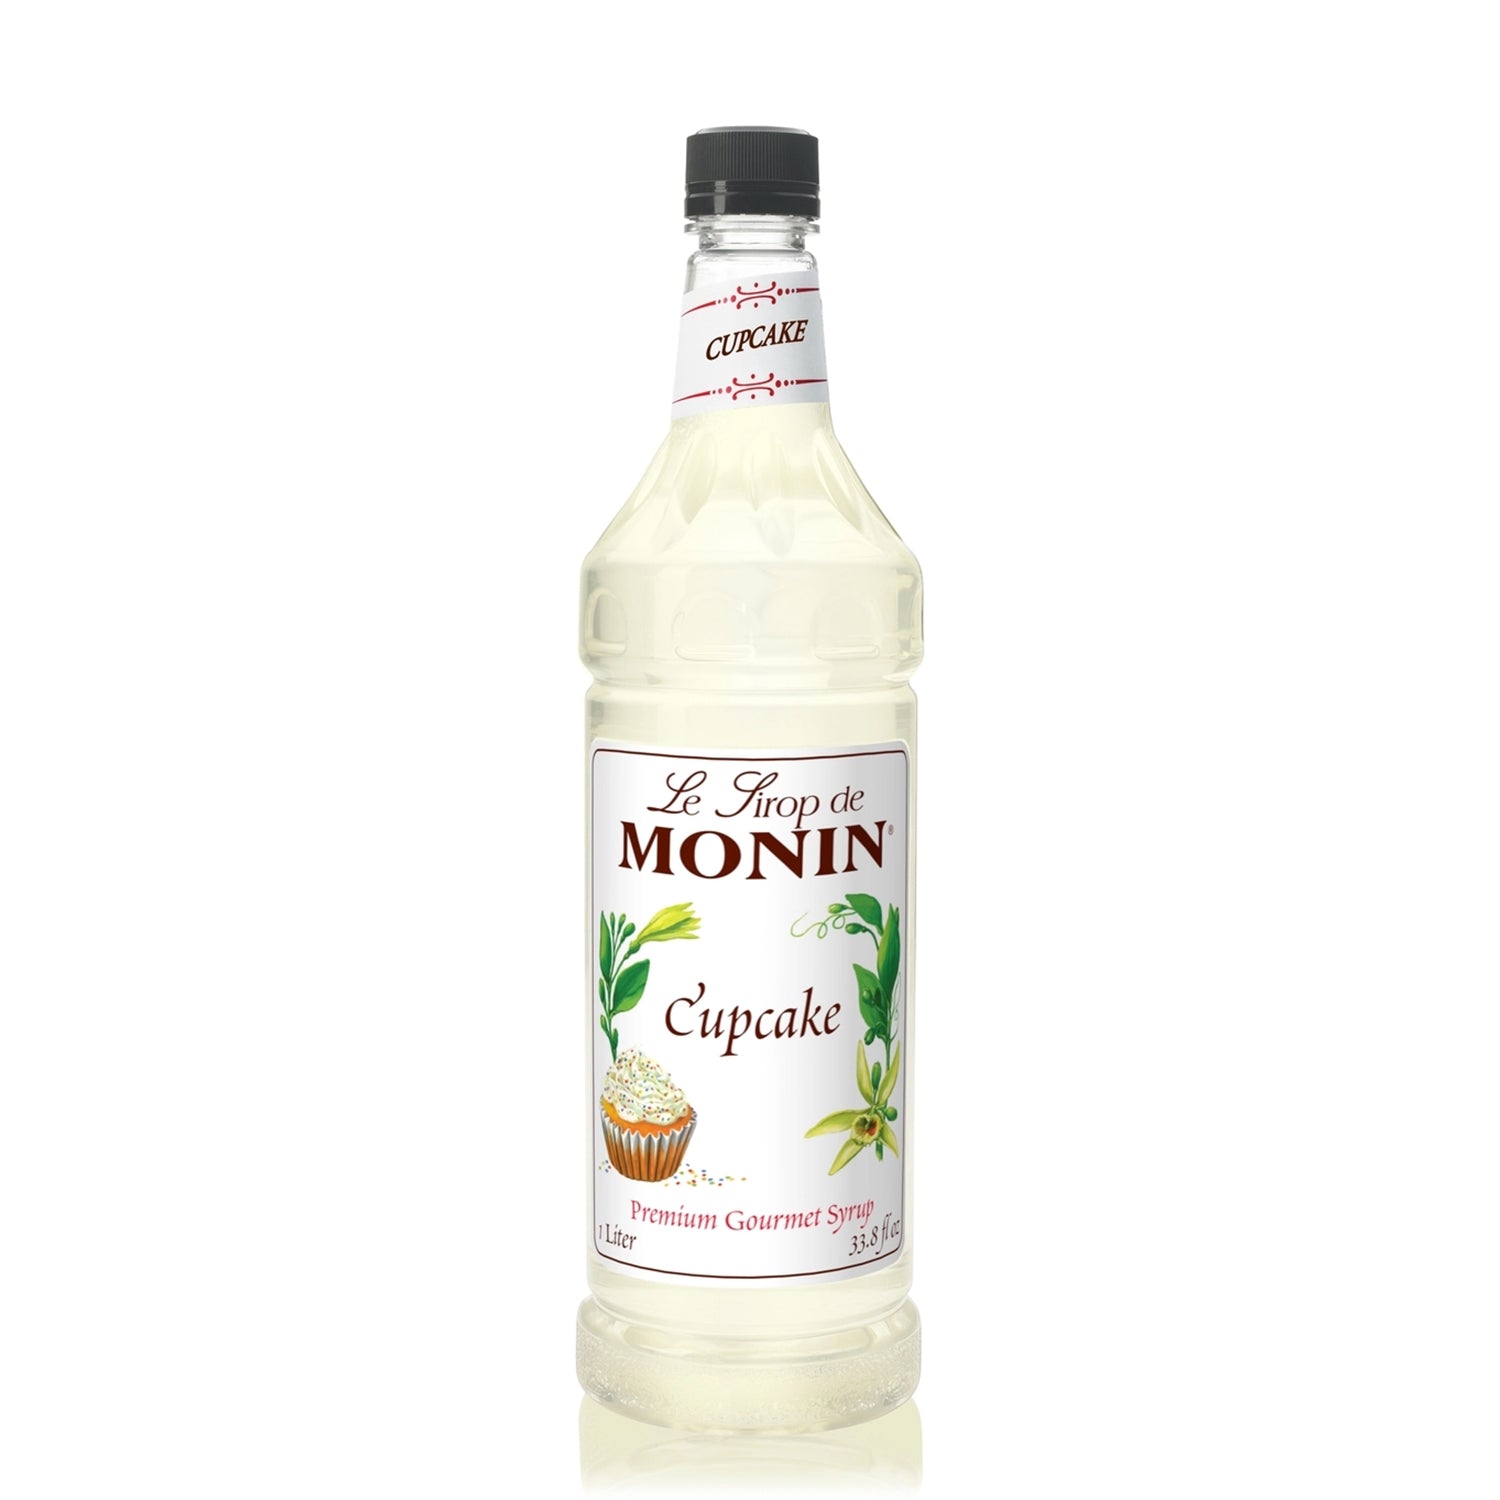 Monin Cupcake Syrup in clear plastic 1 L bottle